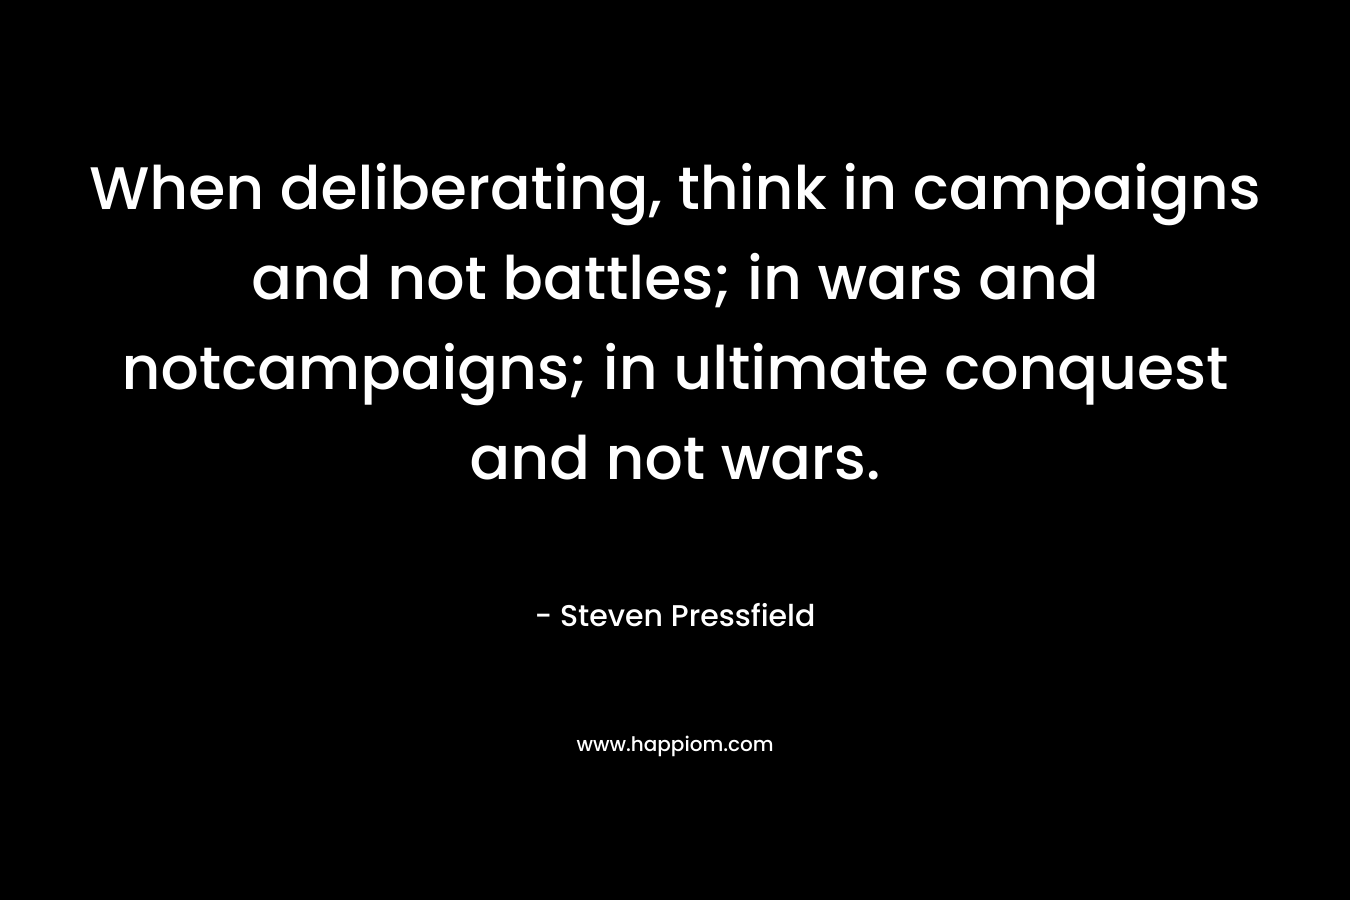 When deliberating, think in campaigns and not battles; in wars and notcampaigns; in ultimate conquest and not wars.